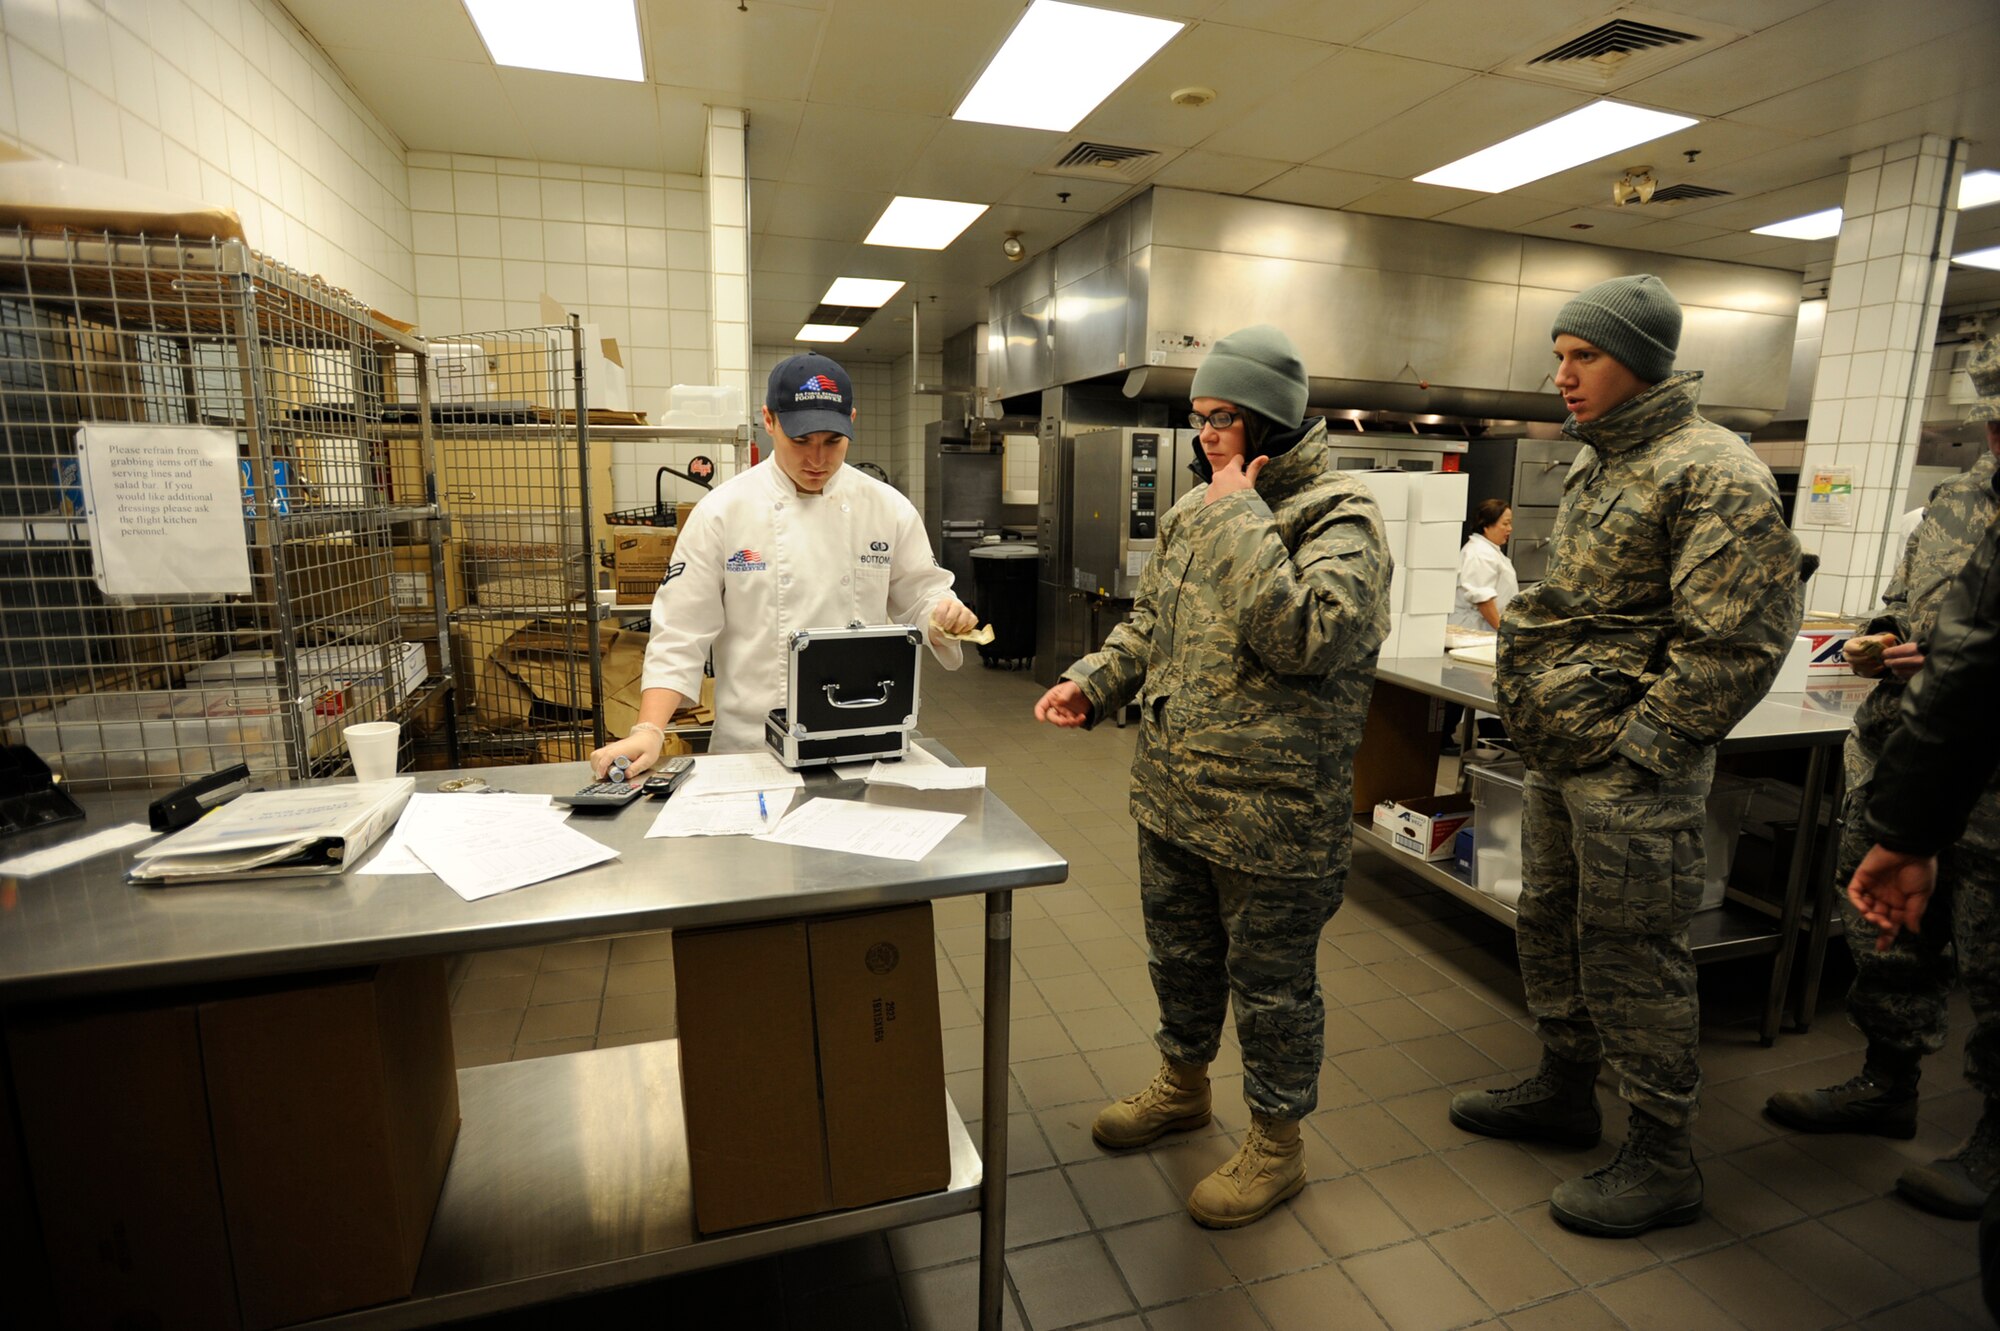 Airman 1st Class Falisha Styles pays Airman 1st Class Cody Bottoms for a boxed lunch from the McConnell Air Force Base dining facility in the early morning of Jan. 10. The lunch was for an air refueling mission Airman Styles and other Airmen from the 22nd Air Refueling Wing flew on that morning with a crew from the 931st Air Refueling Group, an  Air Force Reserve. The 22nd ARW is the 931st's active-duty host unit at McConnell. (U.S. Air Force photo/Tech. Sgt. Jason Schaap)